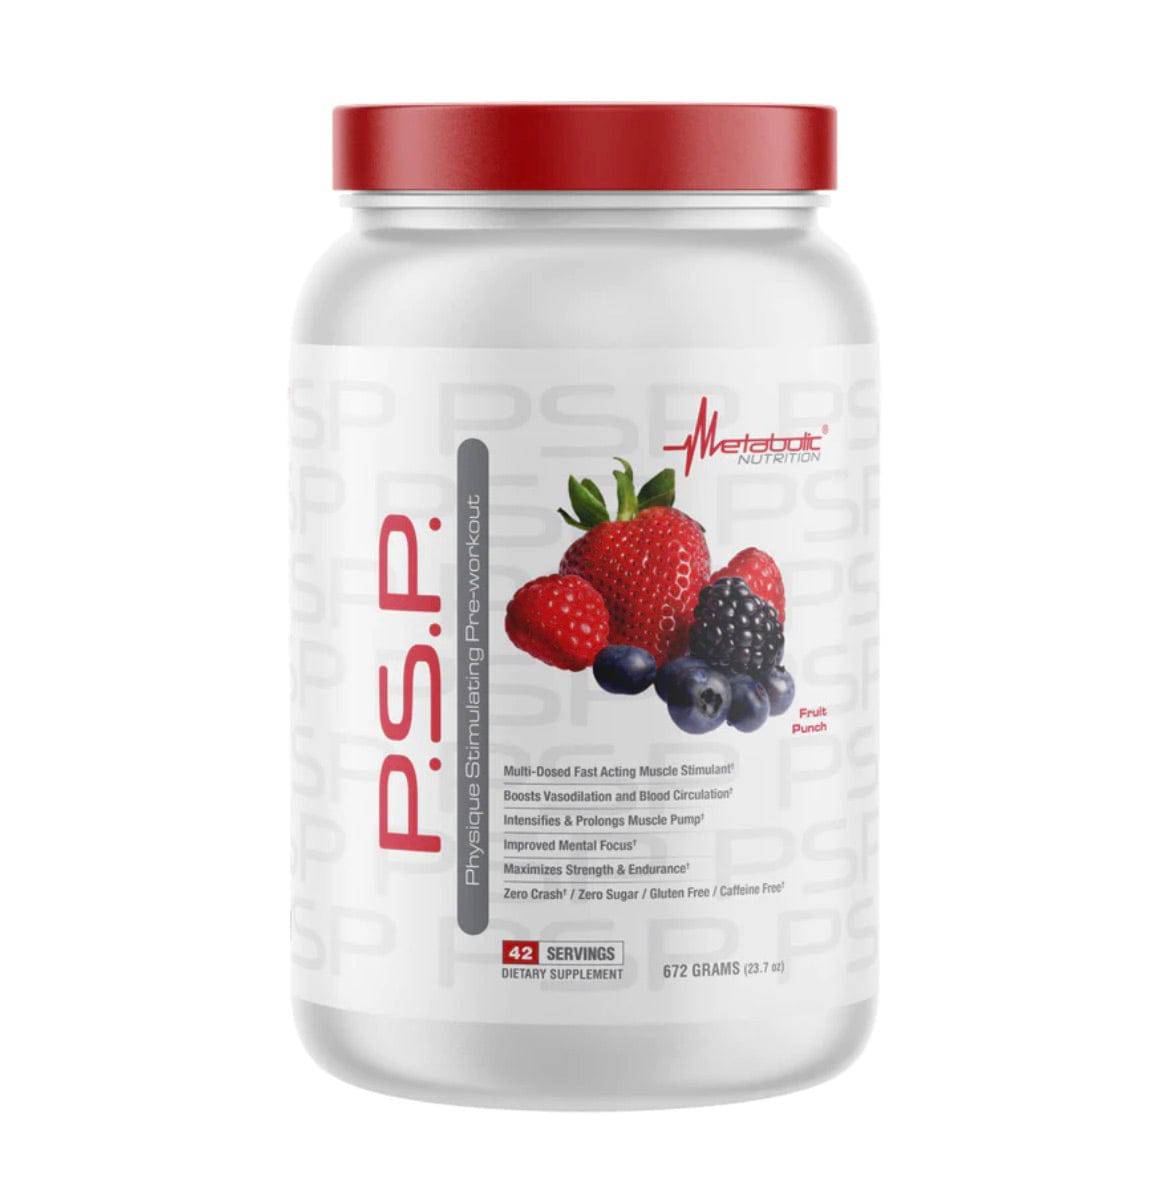 P.S.P. - Metabolic Nutrition - Prime Sports Nutrition